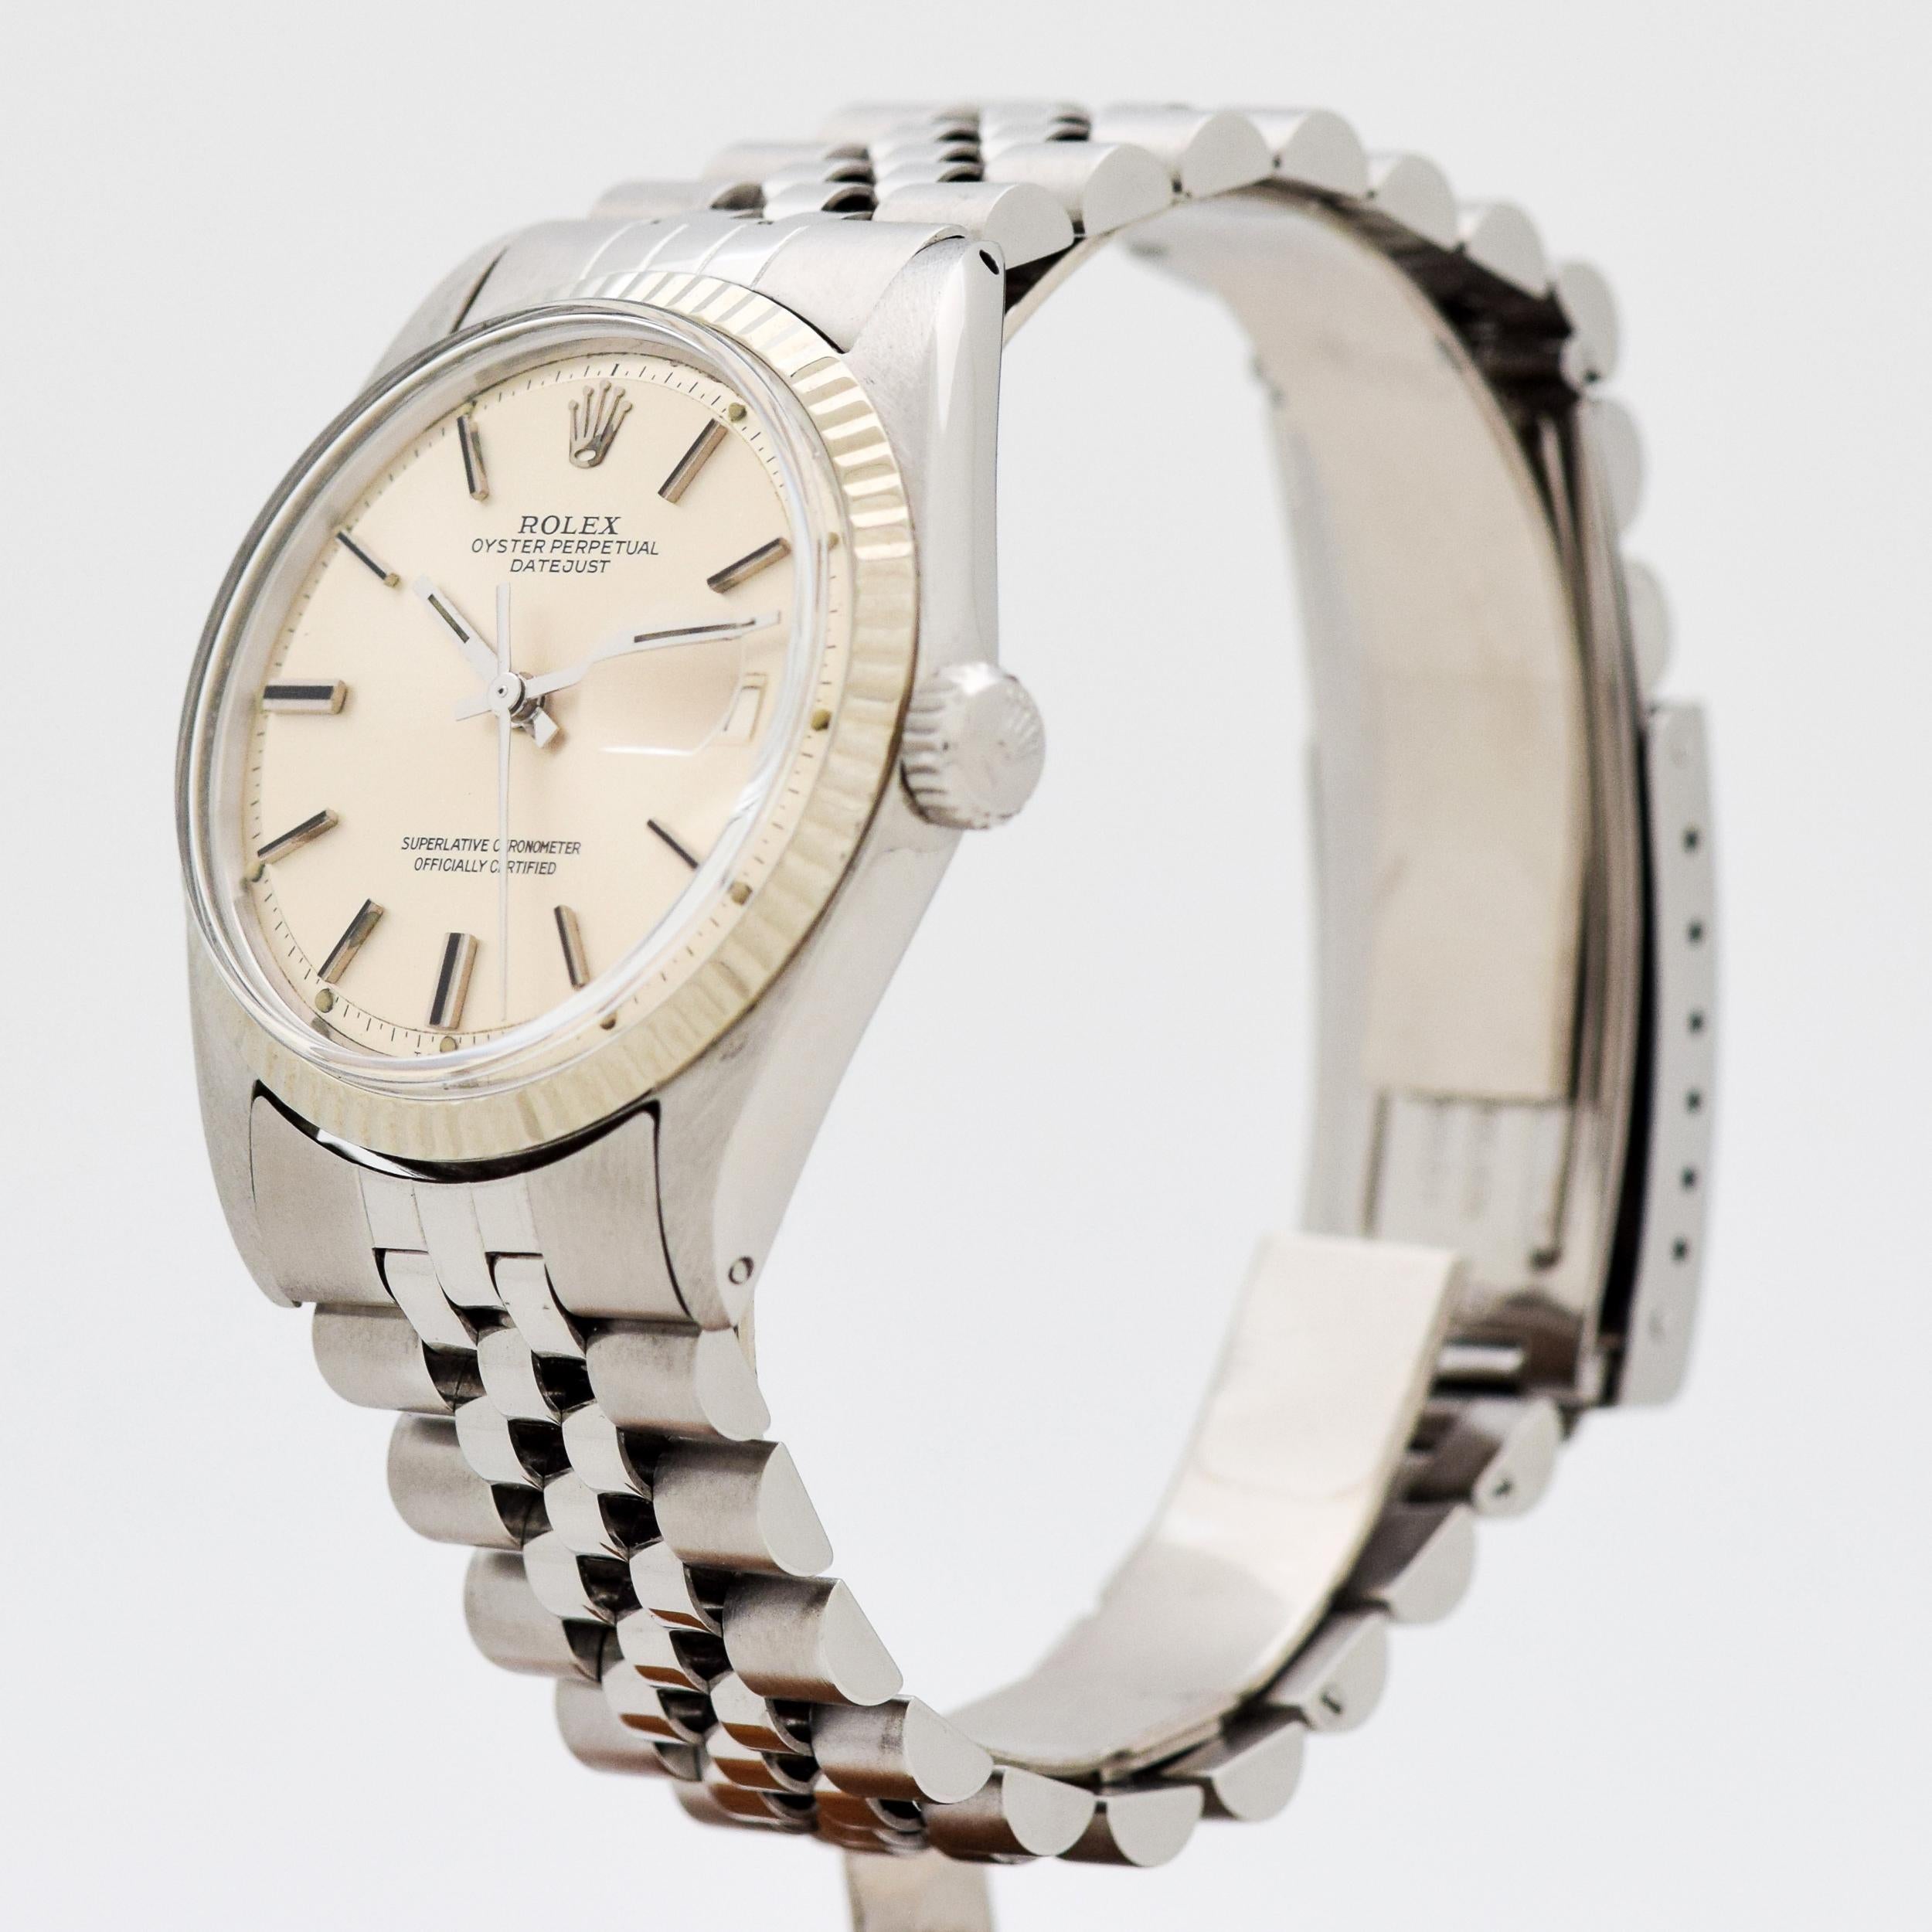 Vintage Rolex Datejust Reference 1601, 1977 In Excellent Condition For Sale In Beverly Hills, CA